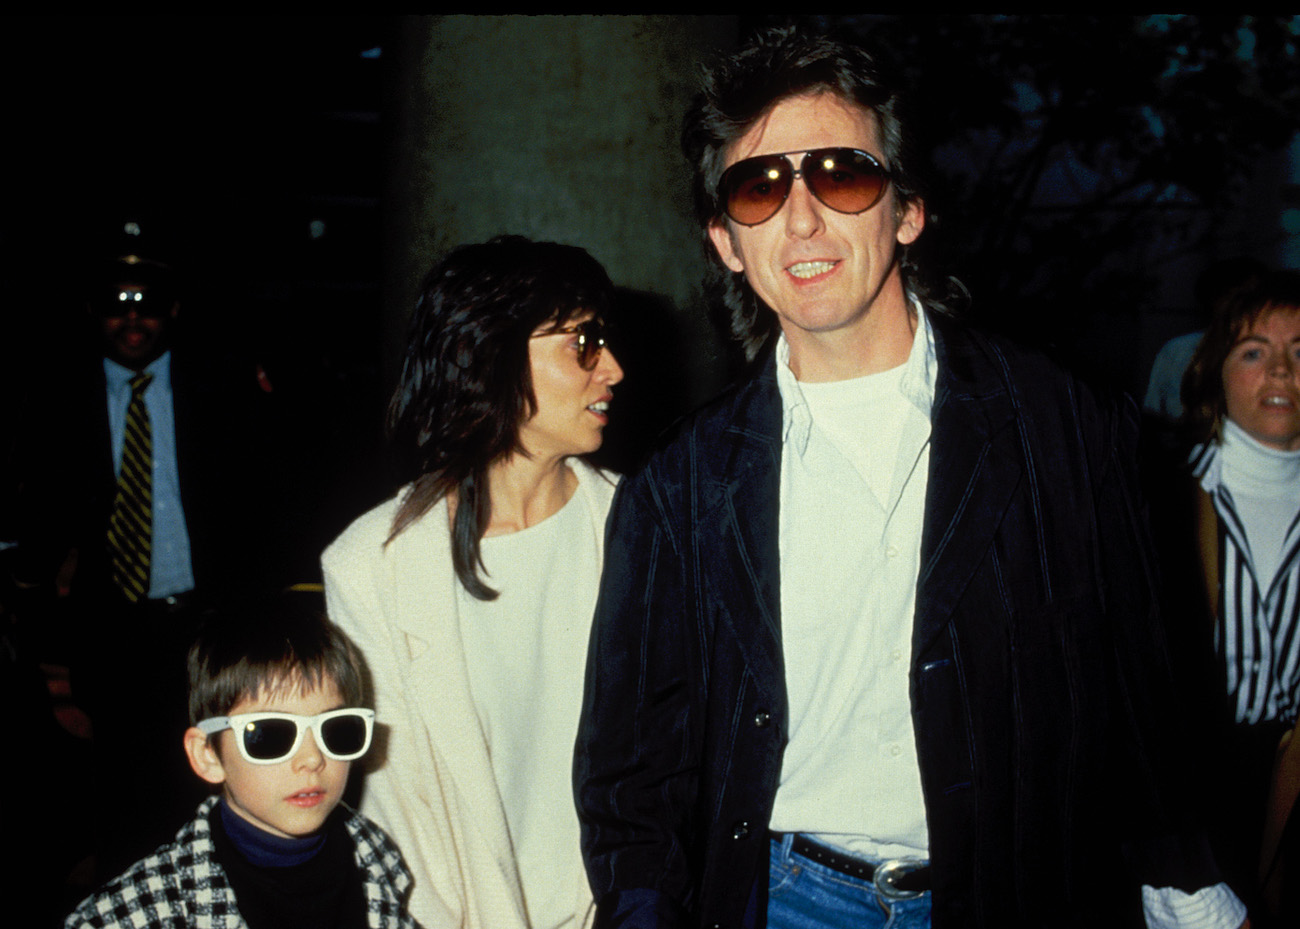 George Harrison with his wife, Olivia, and their son, Dhani in 1988.